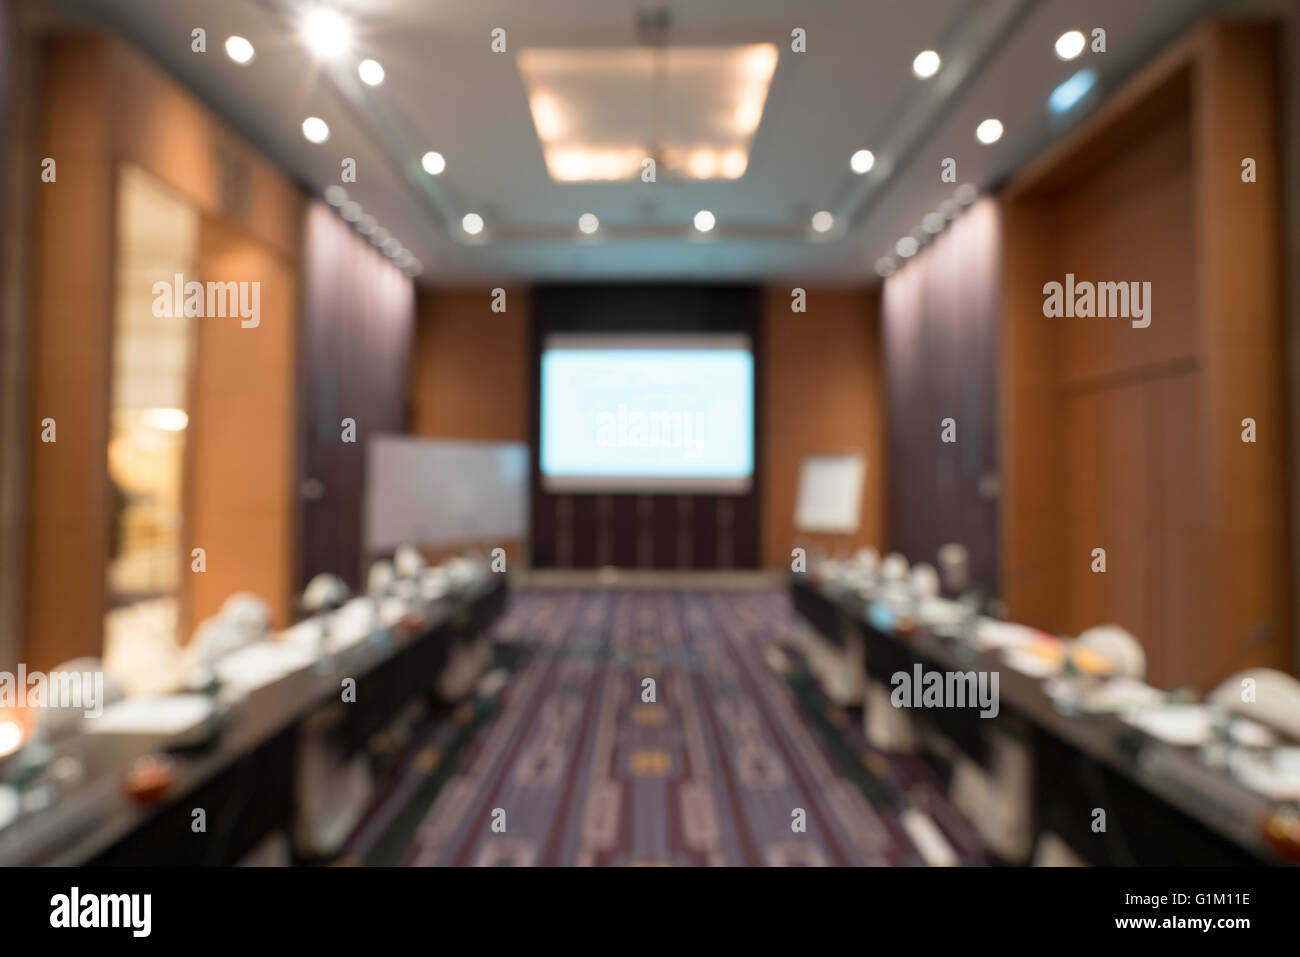 Blurred background image of meeting or conference room Stock Photo